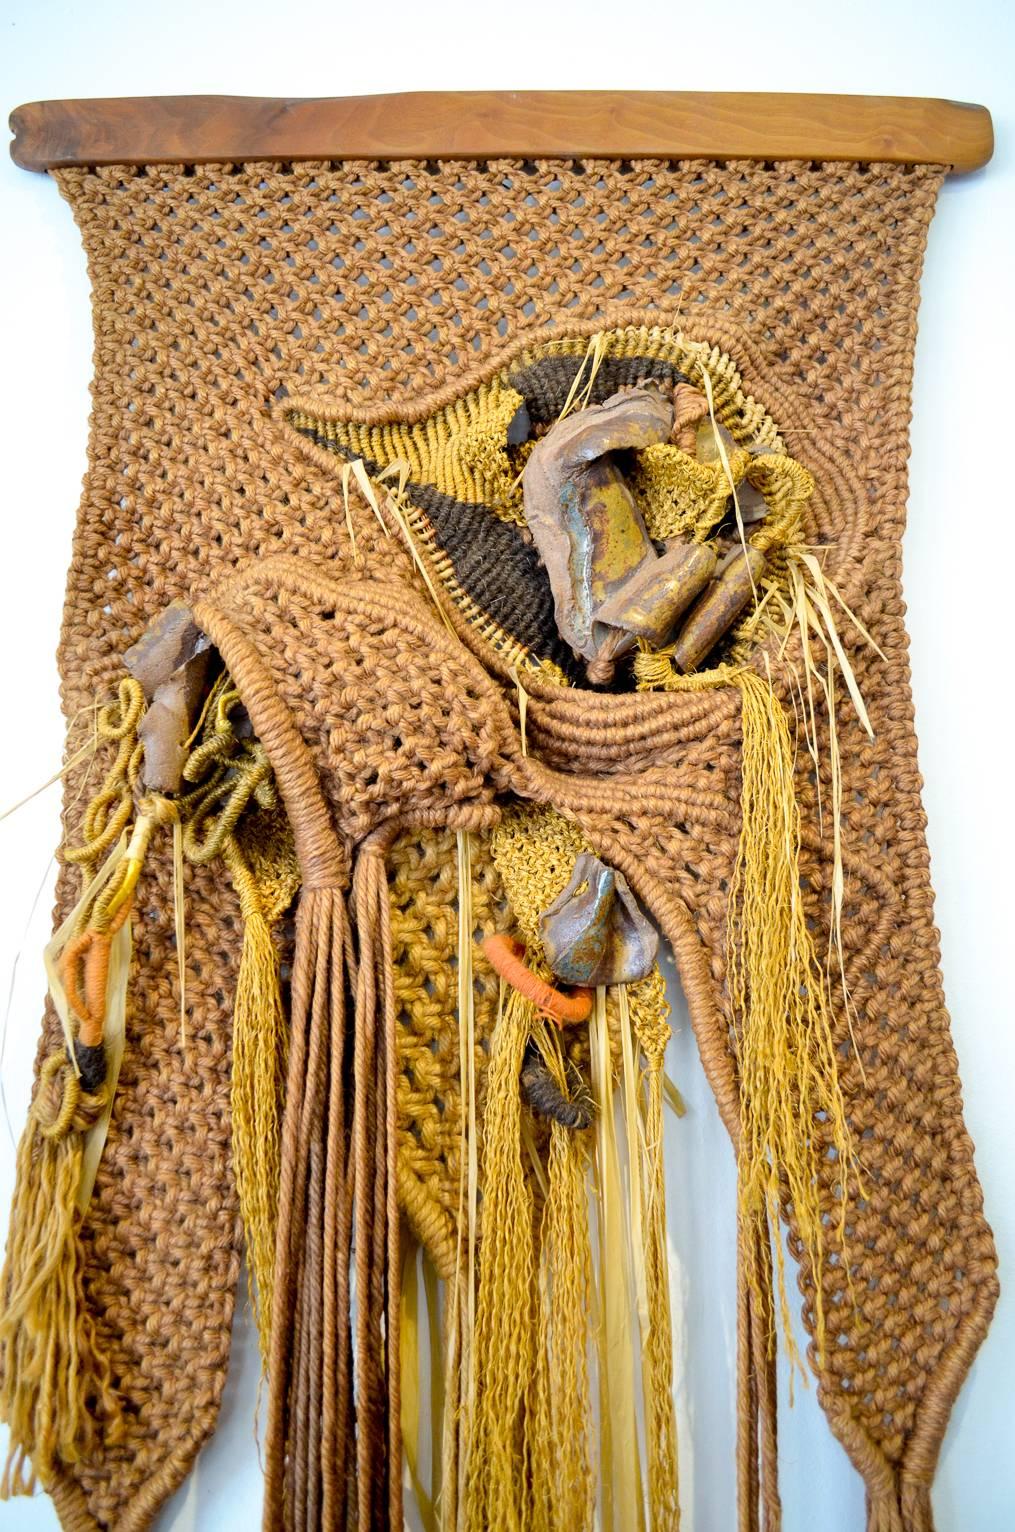 Original and very large sculptural macrame or fiber art wall hanging with handmade and glazed ceramic accents signed by Veta Carr. One owner, came from a fabulous mid century estate in Orange County, CA. Beautiful texture and large size, measures